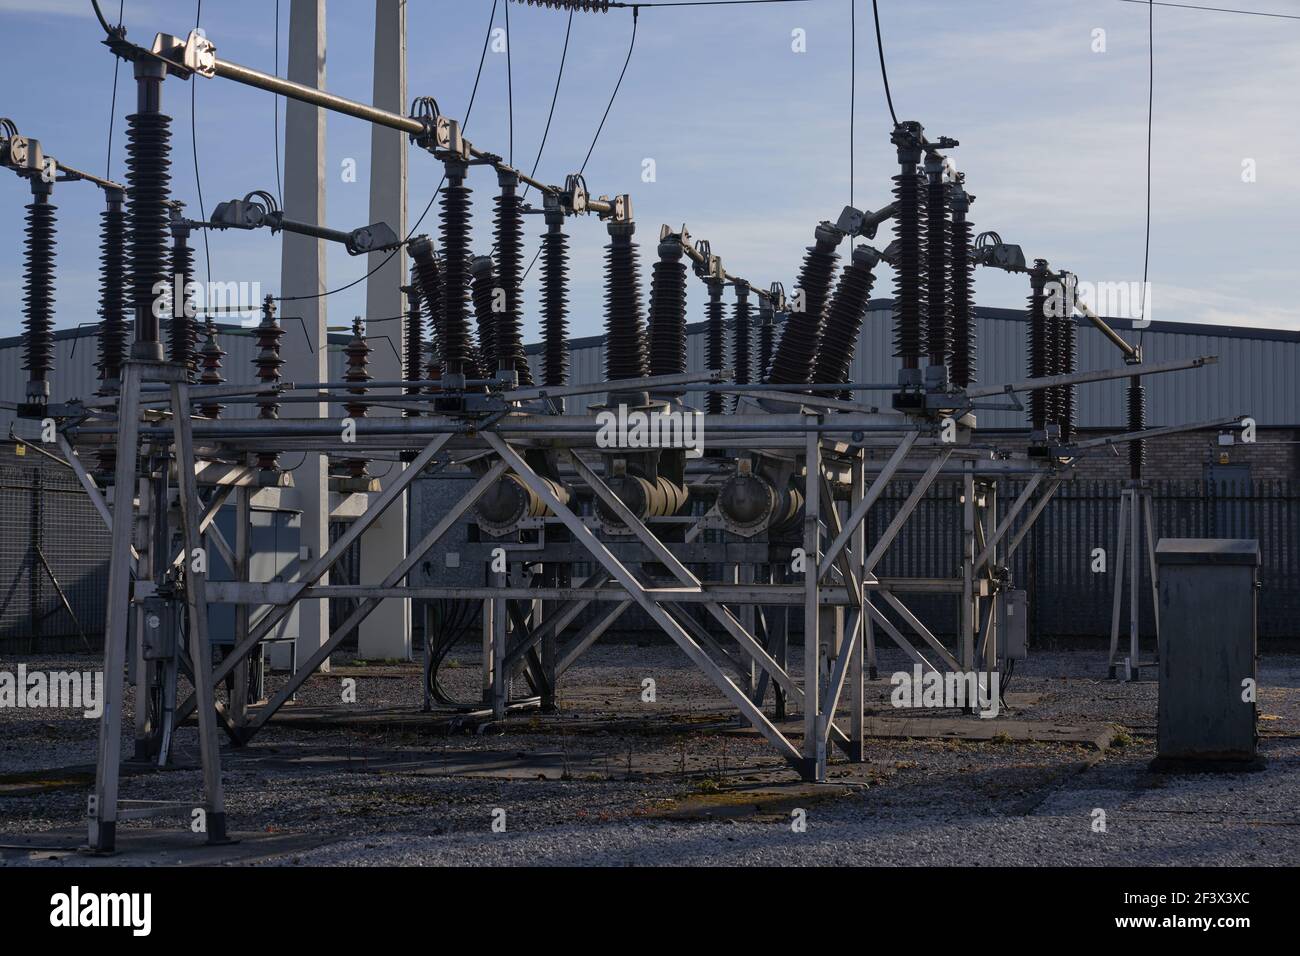 Main distribution line for electricity supply Stock Photo